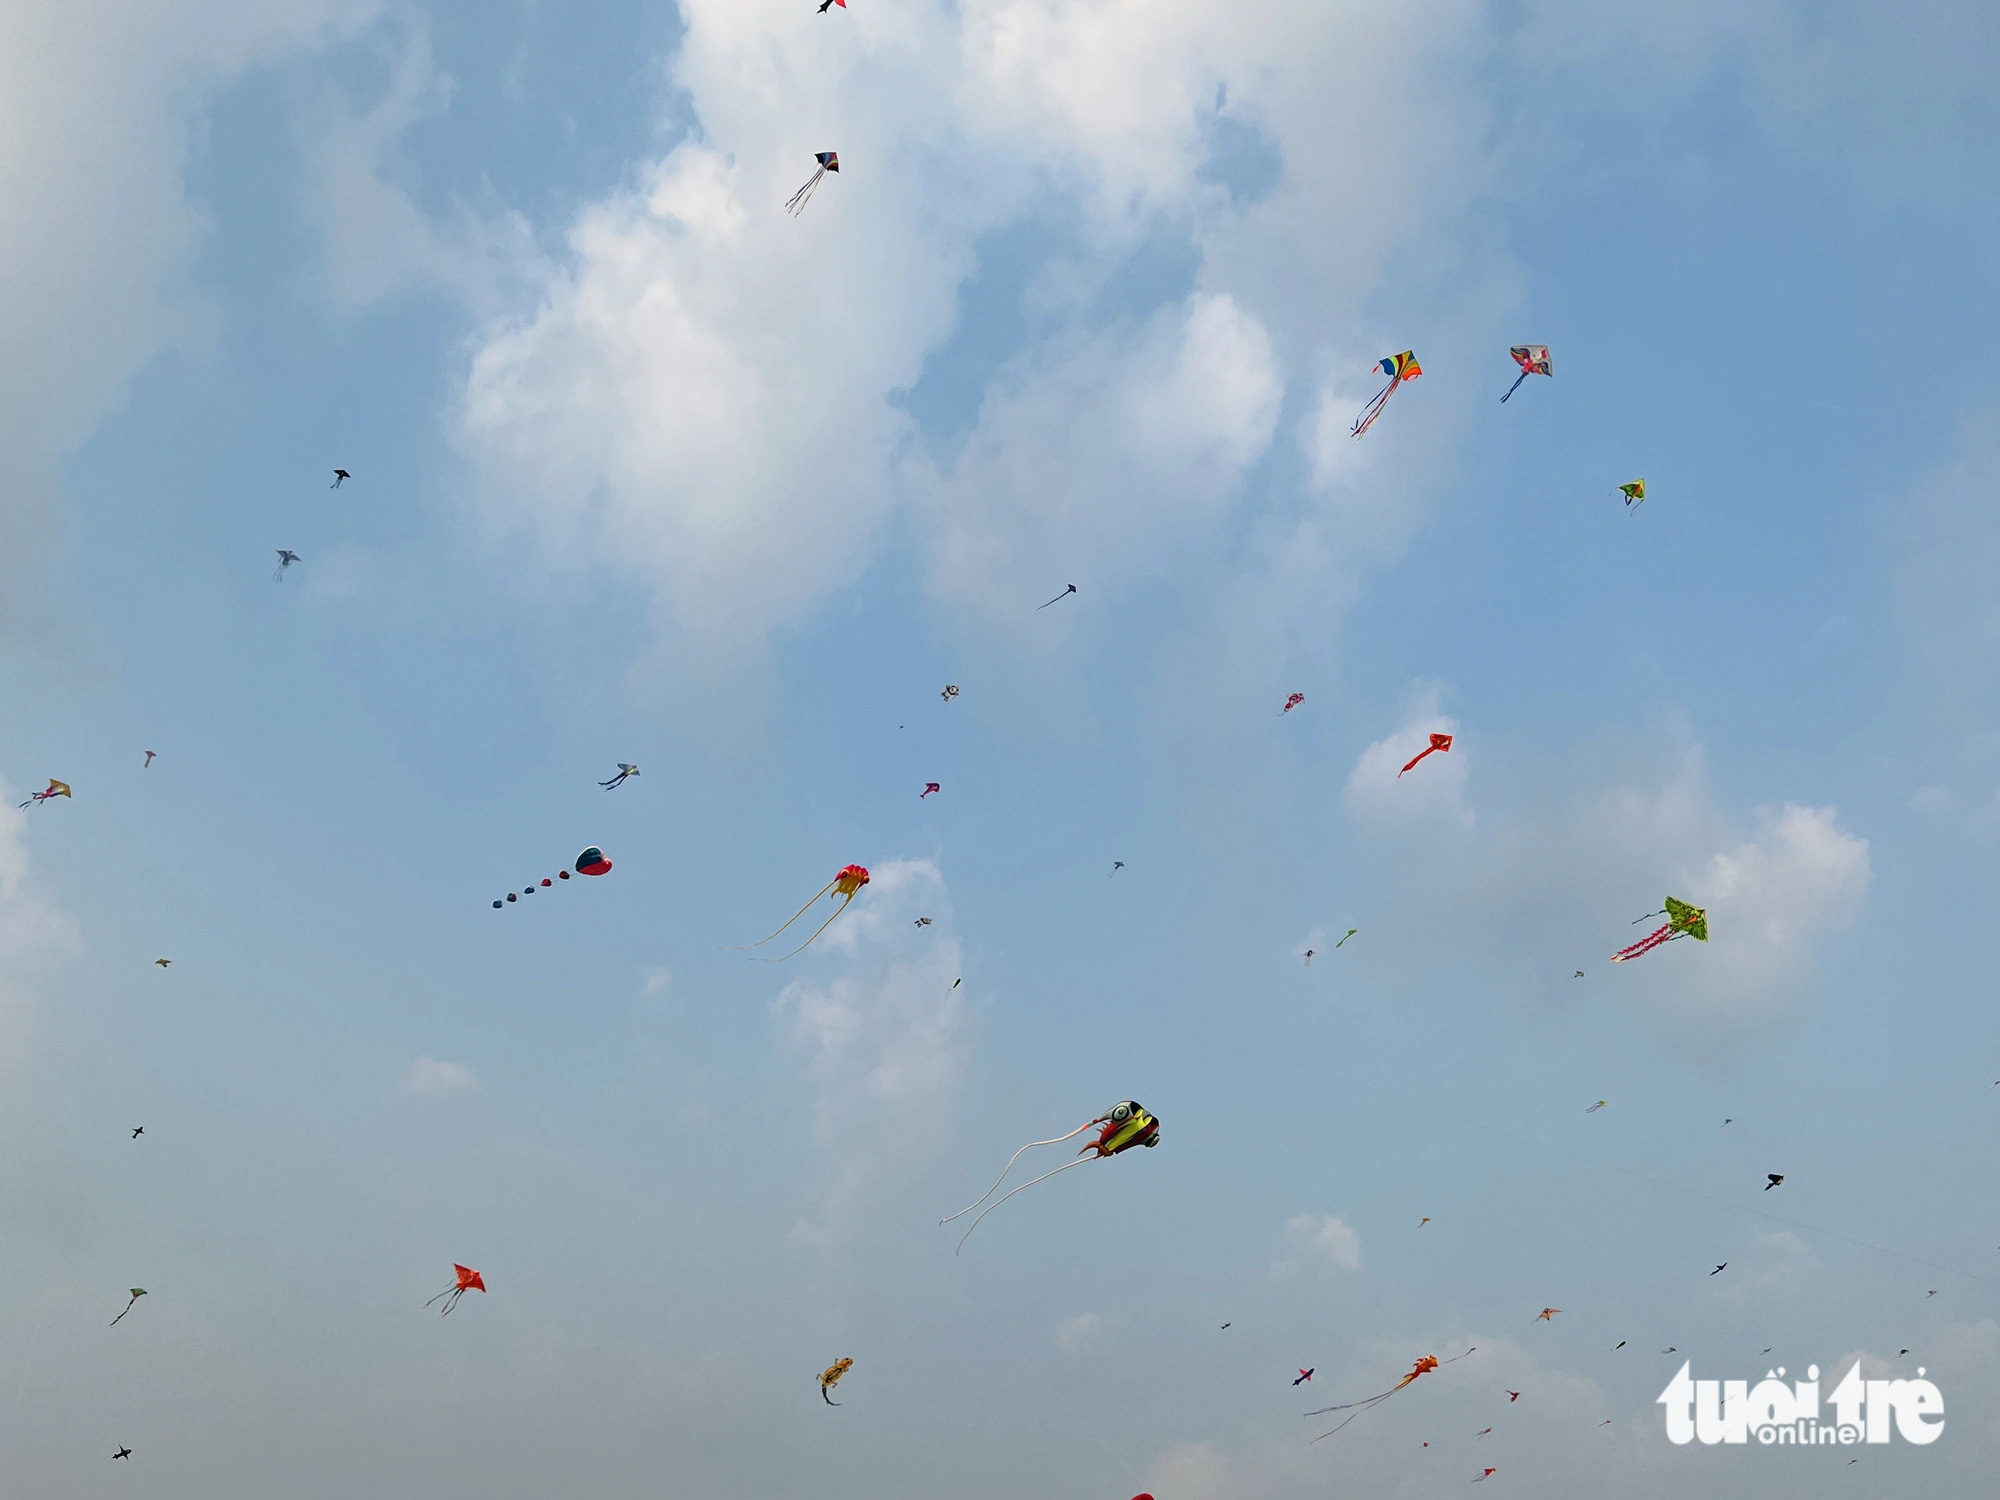 Kites fly above a field along Nguyen Thi Danh Road in the suburban district of Hoc Mon, Ho Chi Minh City. Photo: Yen Trinh / Tuoi Tre